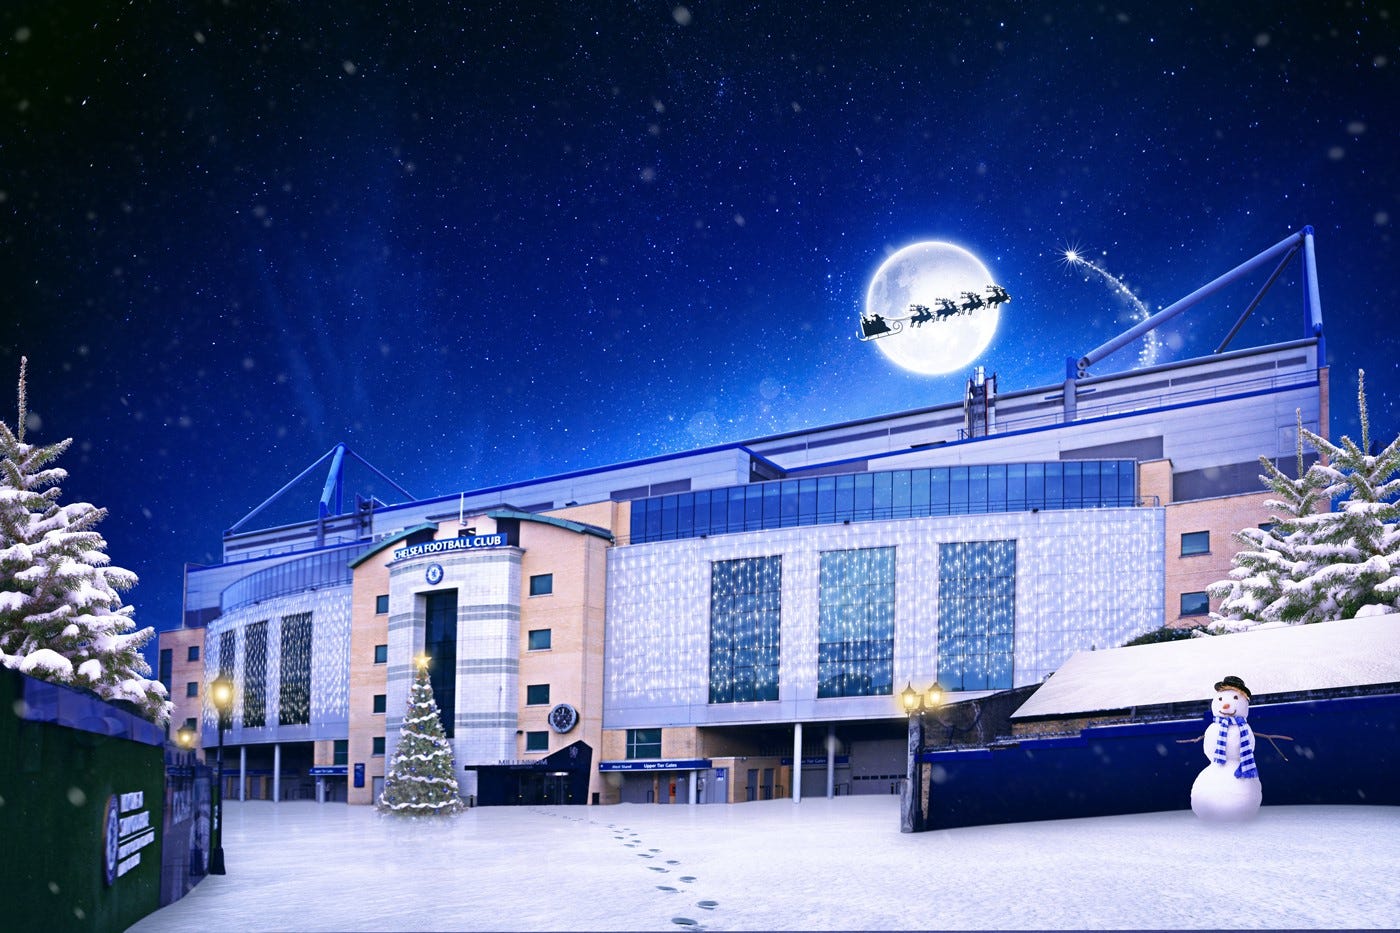 Christmas Parties in South West London |Chelsea Football Club